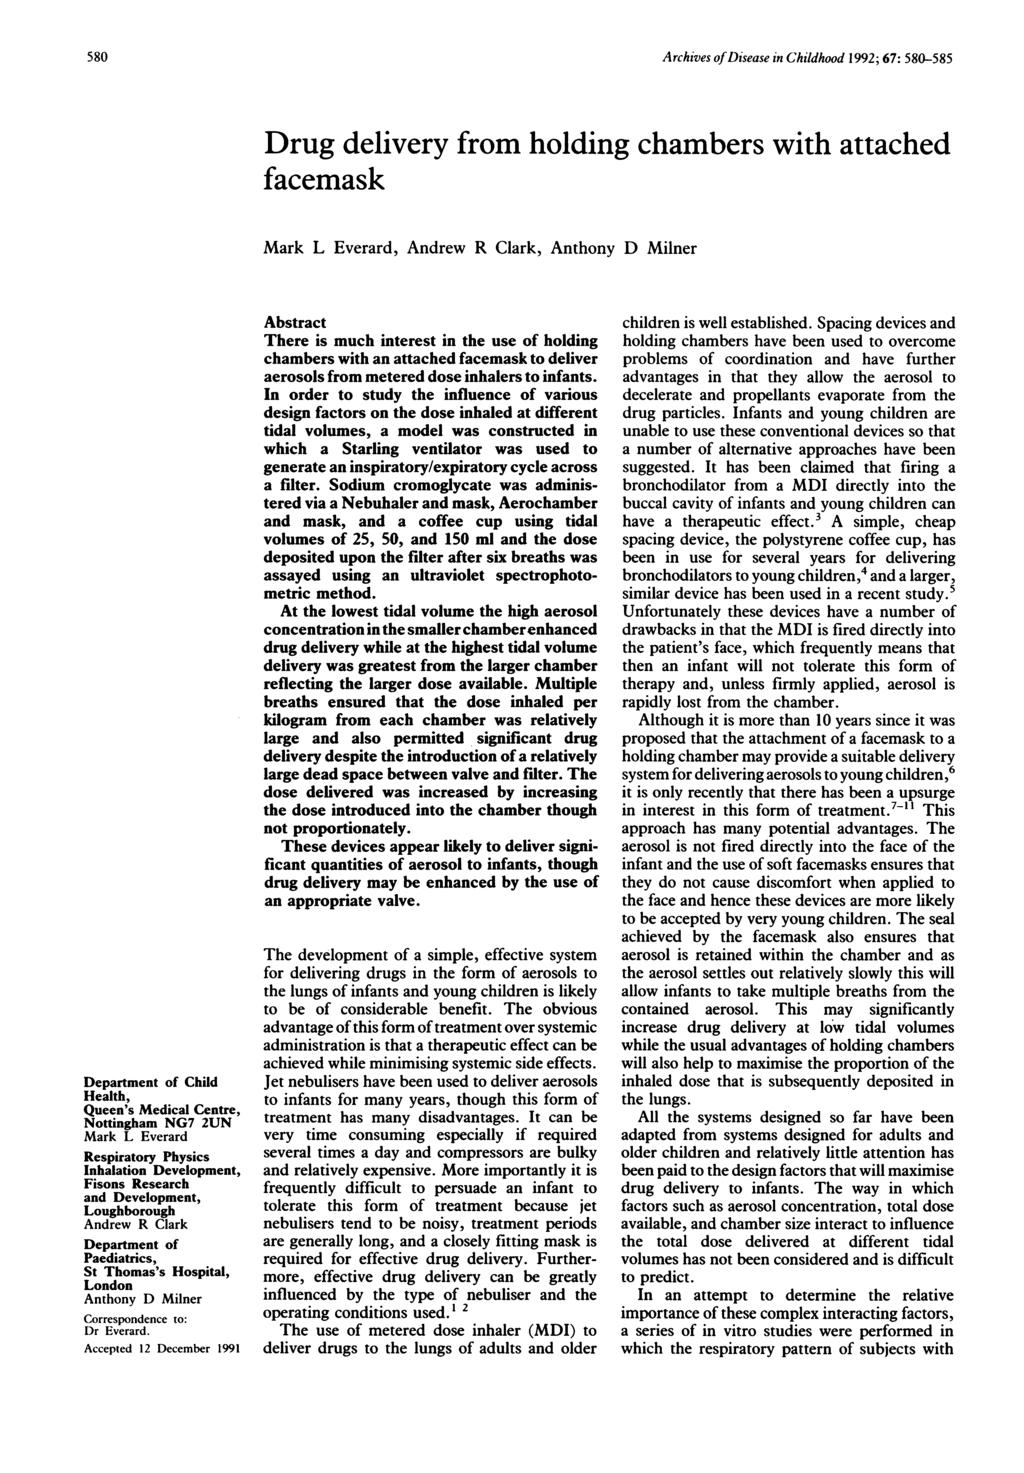 580 Archives ofdisease in Childhood 1992; 67: 580-585 Department of Child Health, Queen's Medical Centre, Nottingham NG7 2UN Mark L Everard Respiratory Physics Inhalation Development, Fisons Research